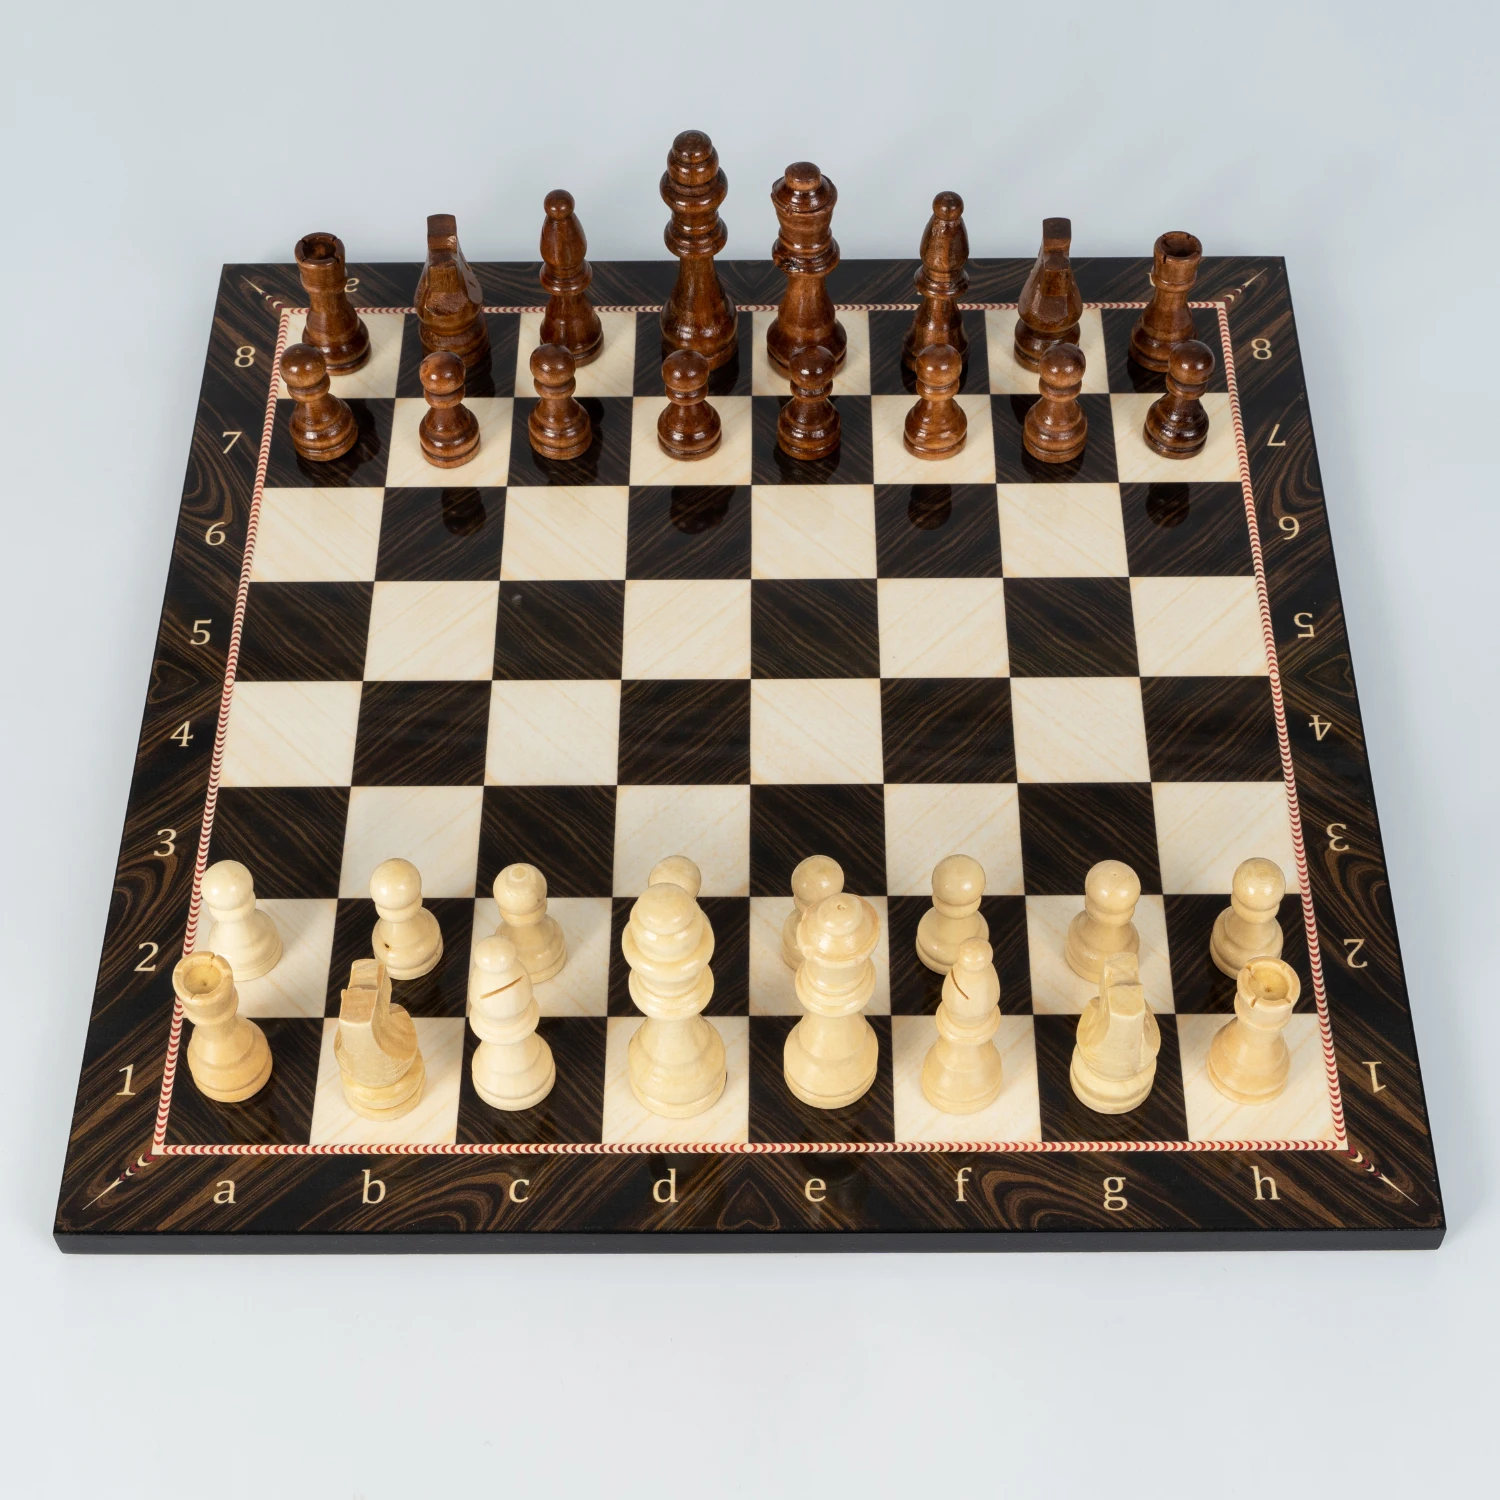 Walnut Chess Board Game High Quality Perfect Gift Pieces Included